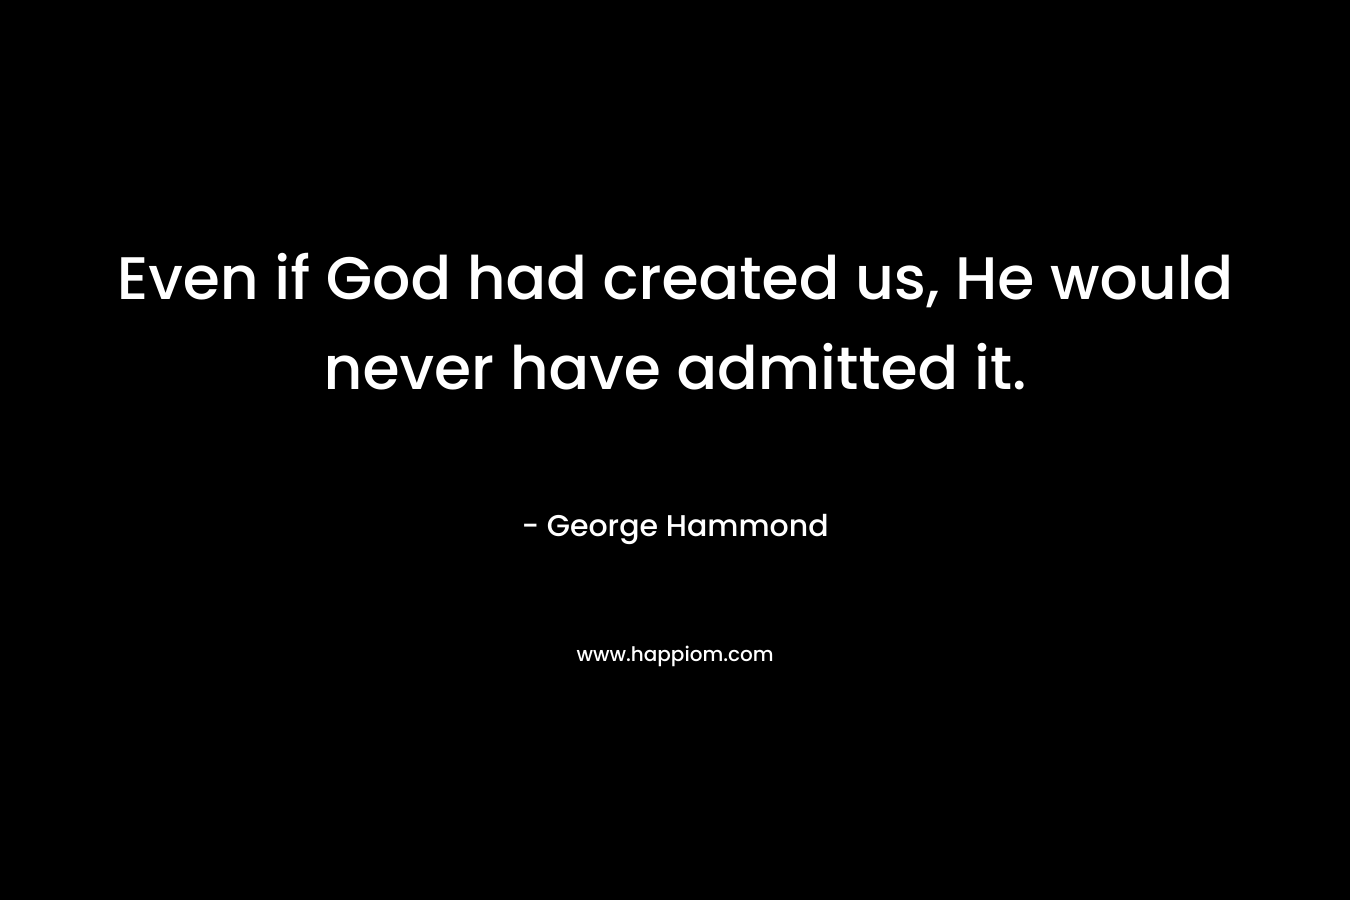 Even if God had created us, He would never have admitted it.